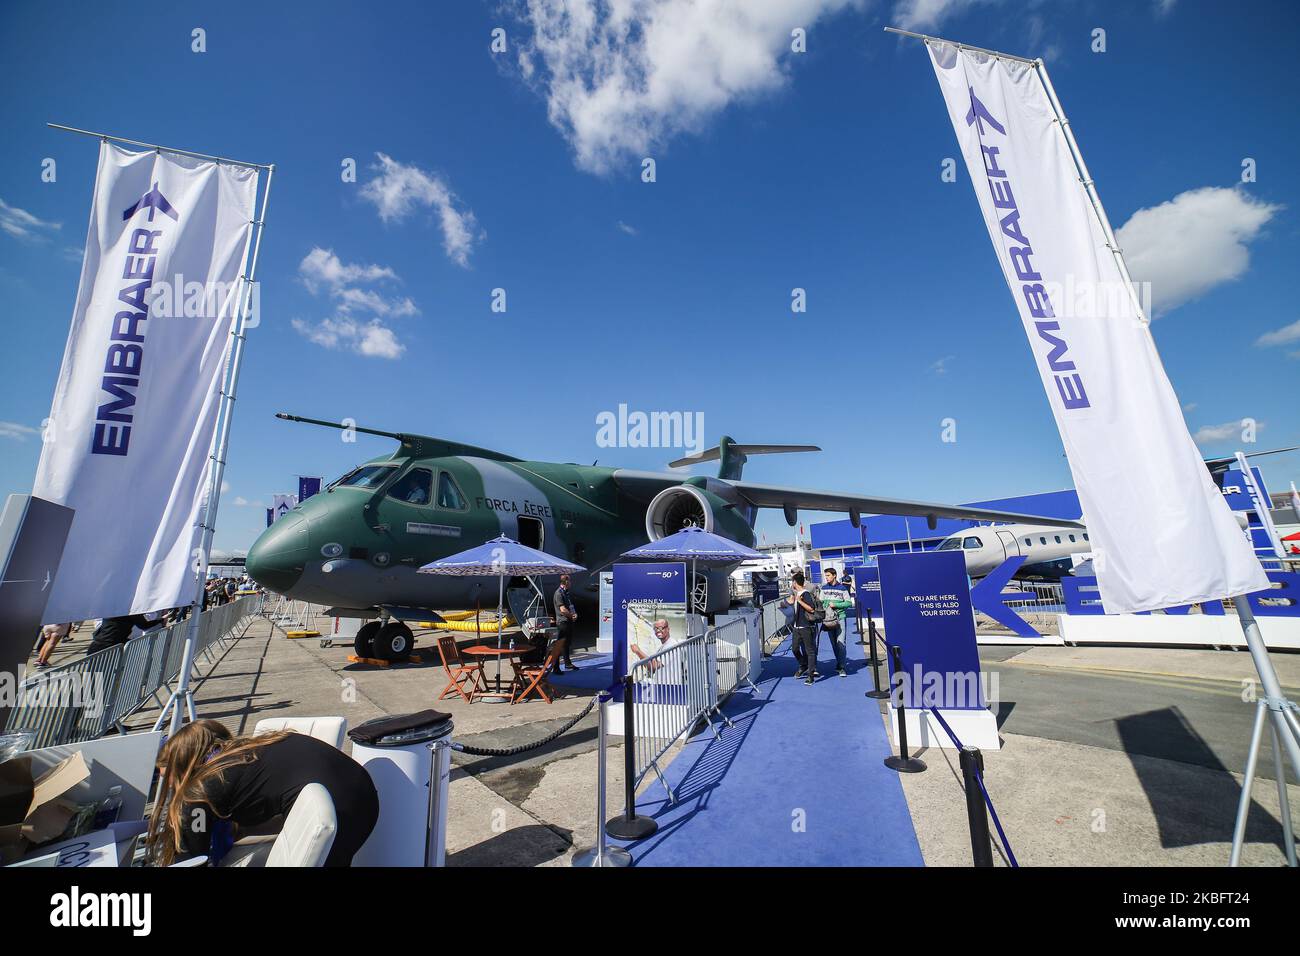 Brazilian Air Force Embraer KC-390 renamed after Boeing and Embraer deal as C-390 Millennium, the made in Brazil medium sized transport aircraft as seen on 53rd Paris Air Show Le Bourget in France on June 21, 2019. It is made by Brazilian aerospace manufacturer Embraer Defense and Security with its first flight on February 3, 2019. The military multipurpose airplane for cargo, aerialrefueling and troops can carry 26 tonnes in its fuselage and the 2x IAE V2500 jet engines. The aircraft registration is PT-ZNX and belongs to Força Aérea Brasileira fleet. Brazil and Portuguese Air Force of Portuga Stock Photo